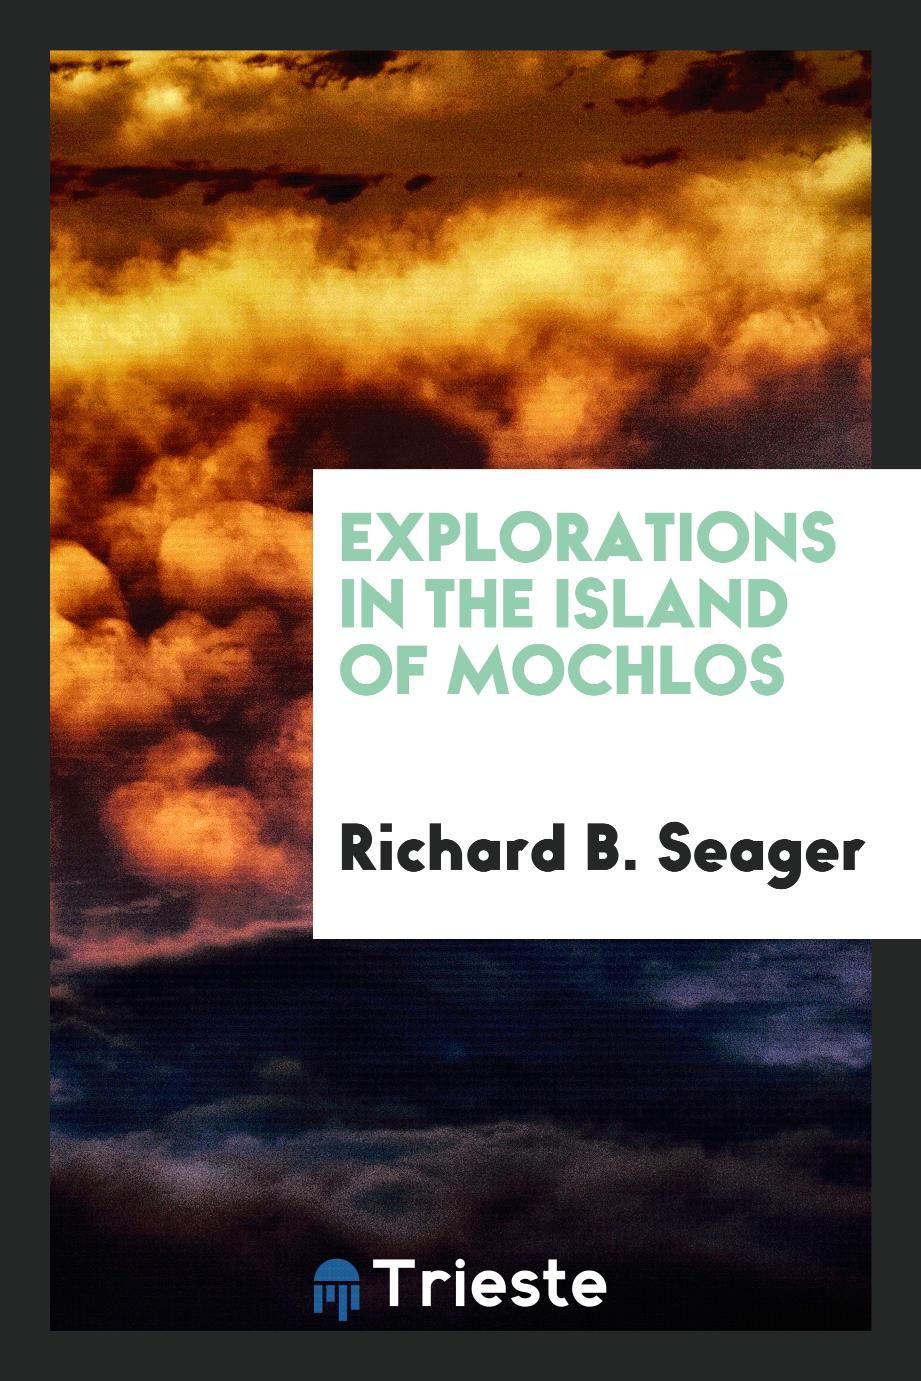 Explorations in the island of Mochlos